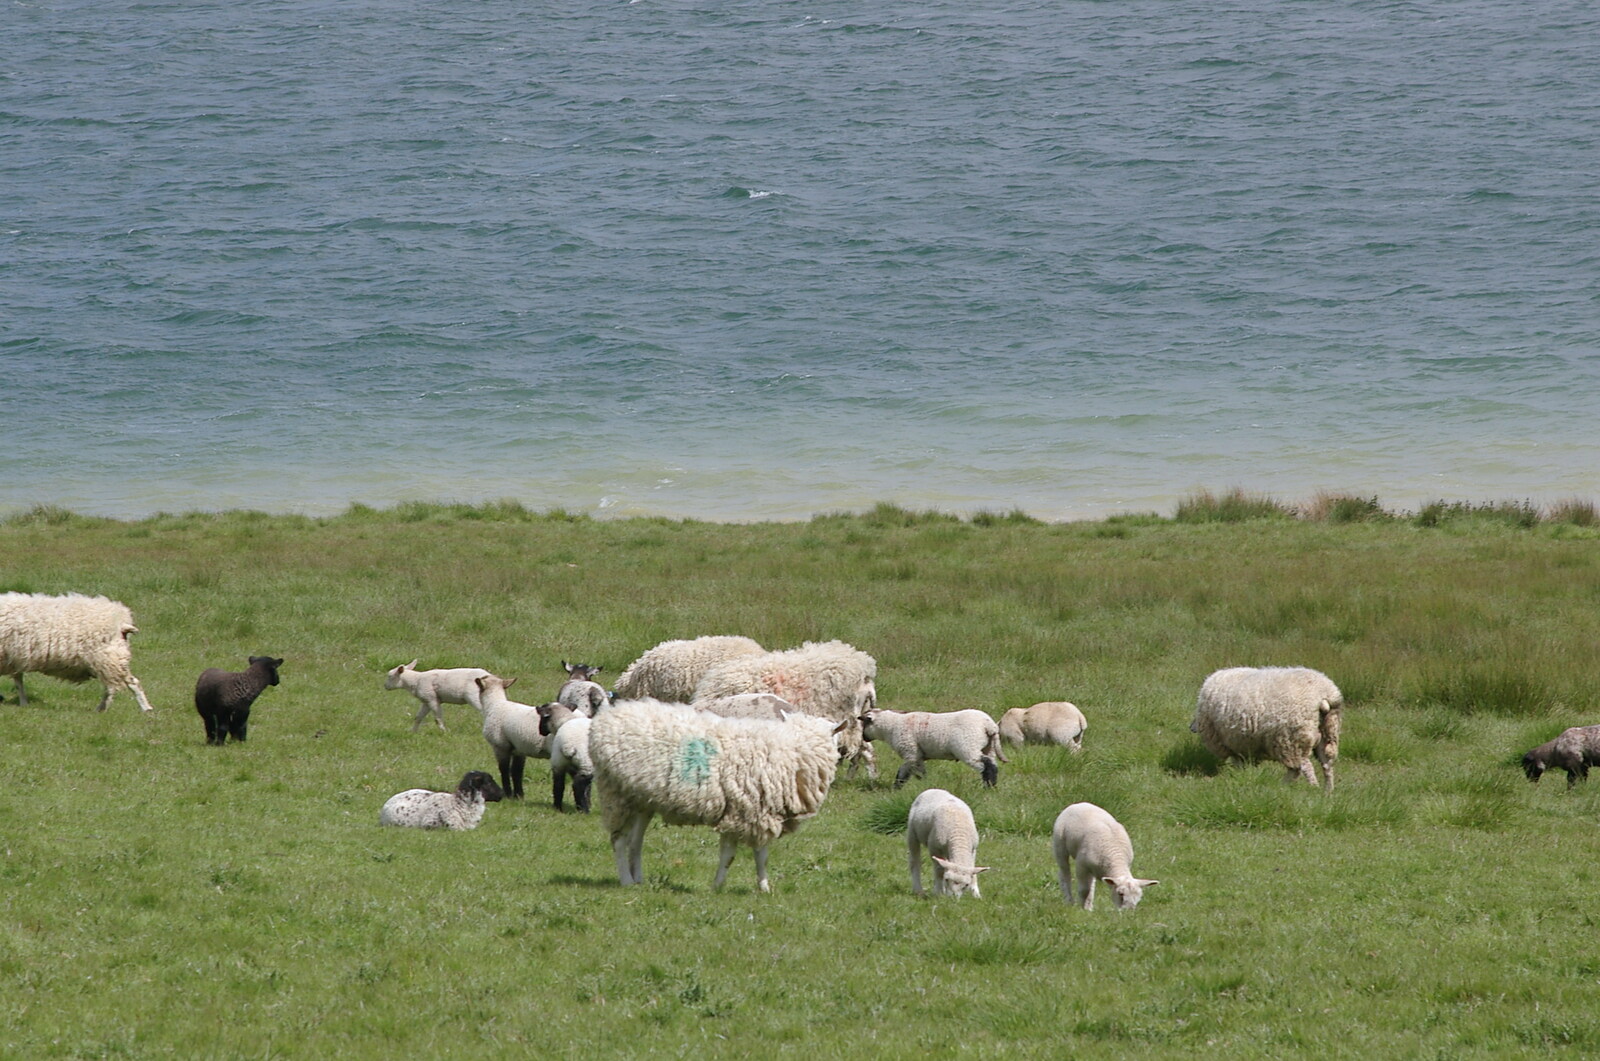 Sheep from The BSCC Weekend Trip to Rutland Water, Empingham, Rutland - 14th May 2005